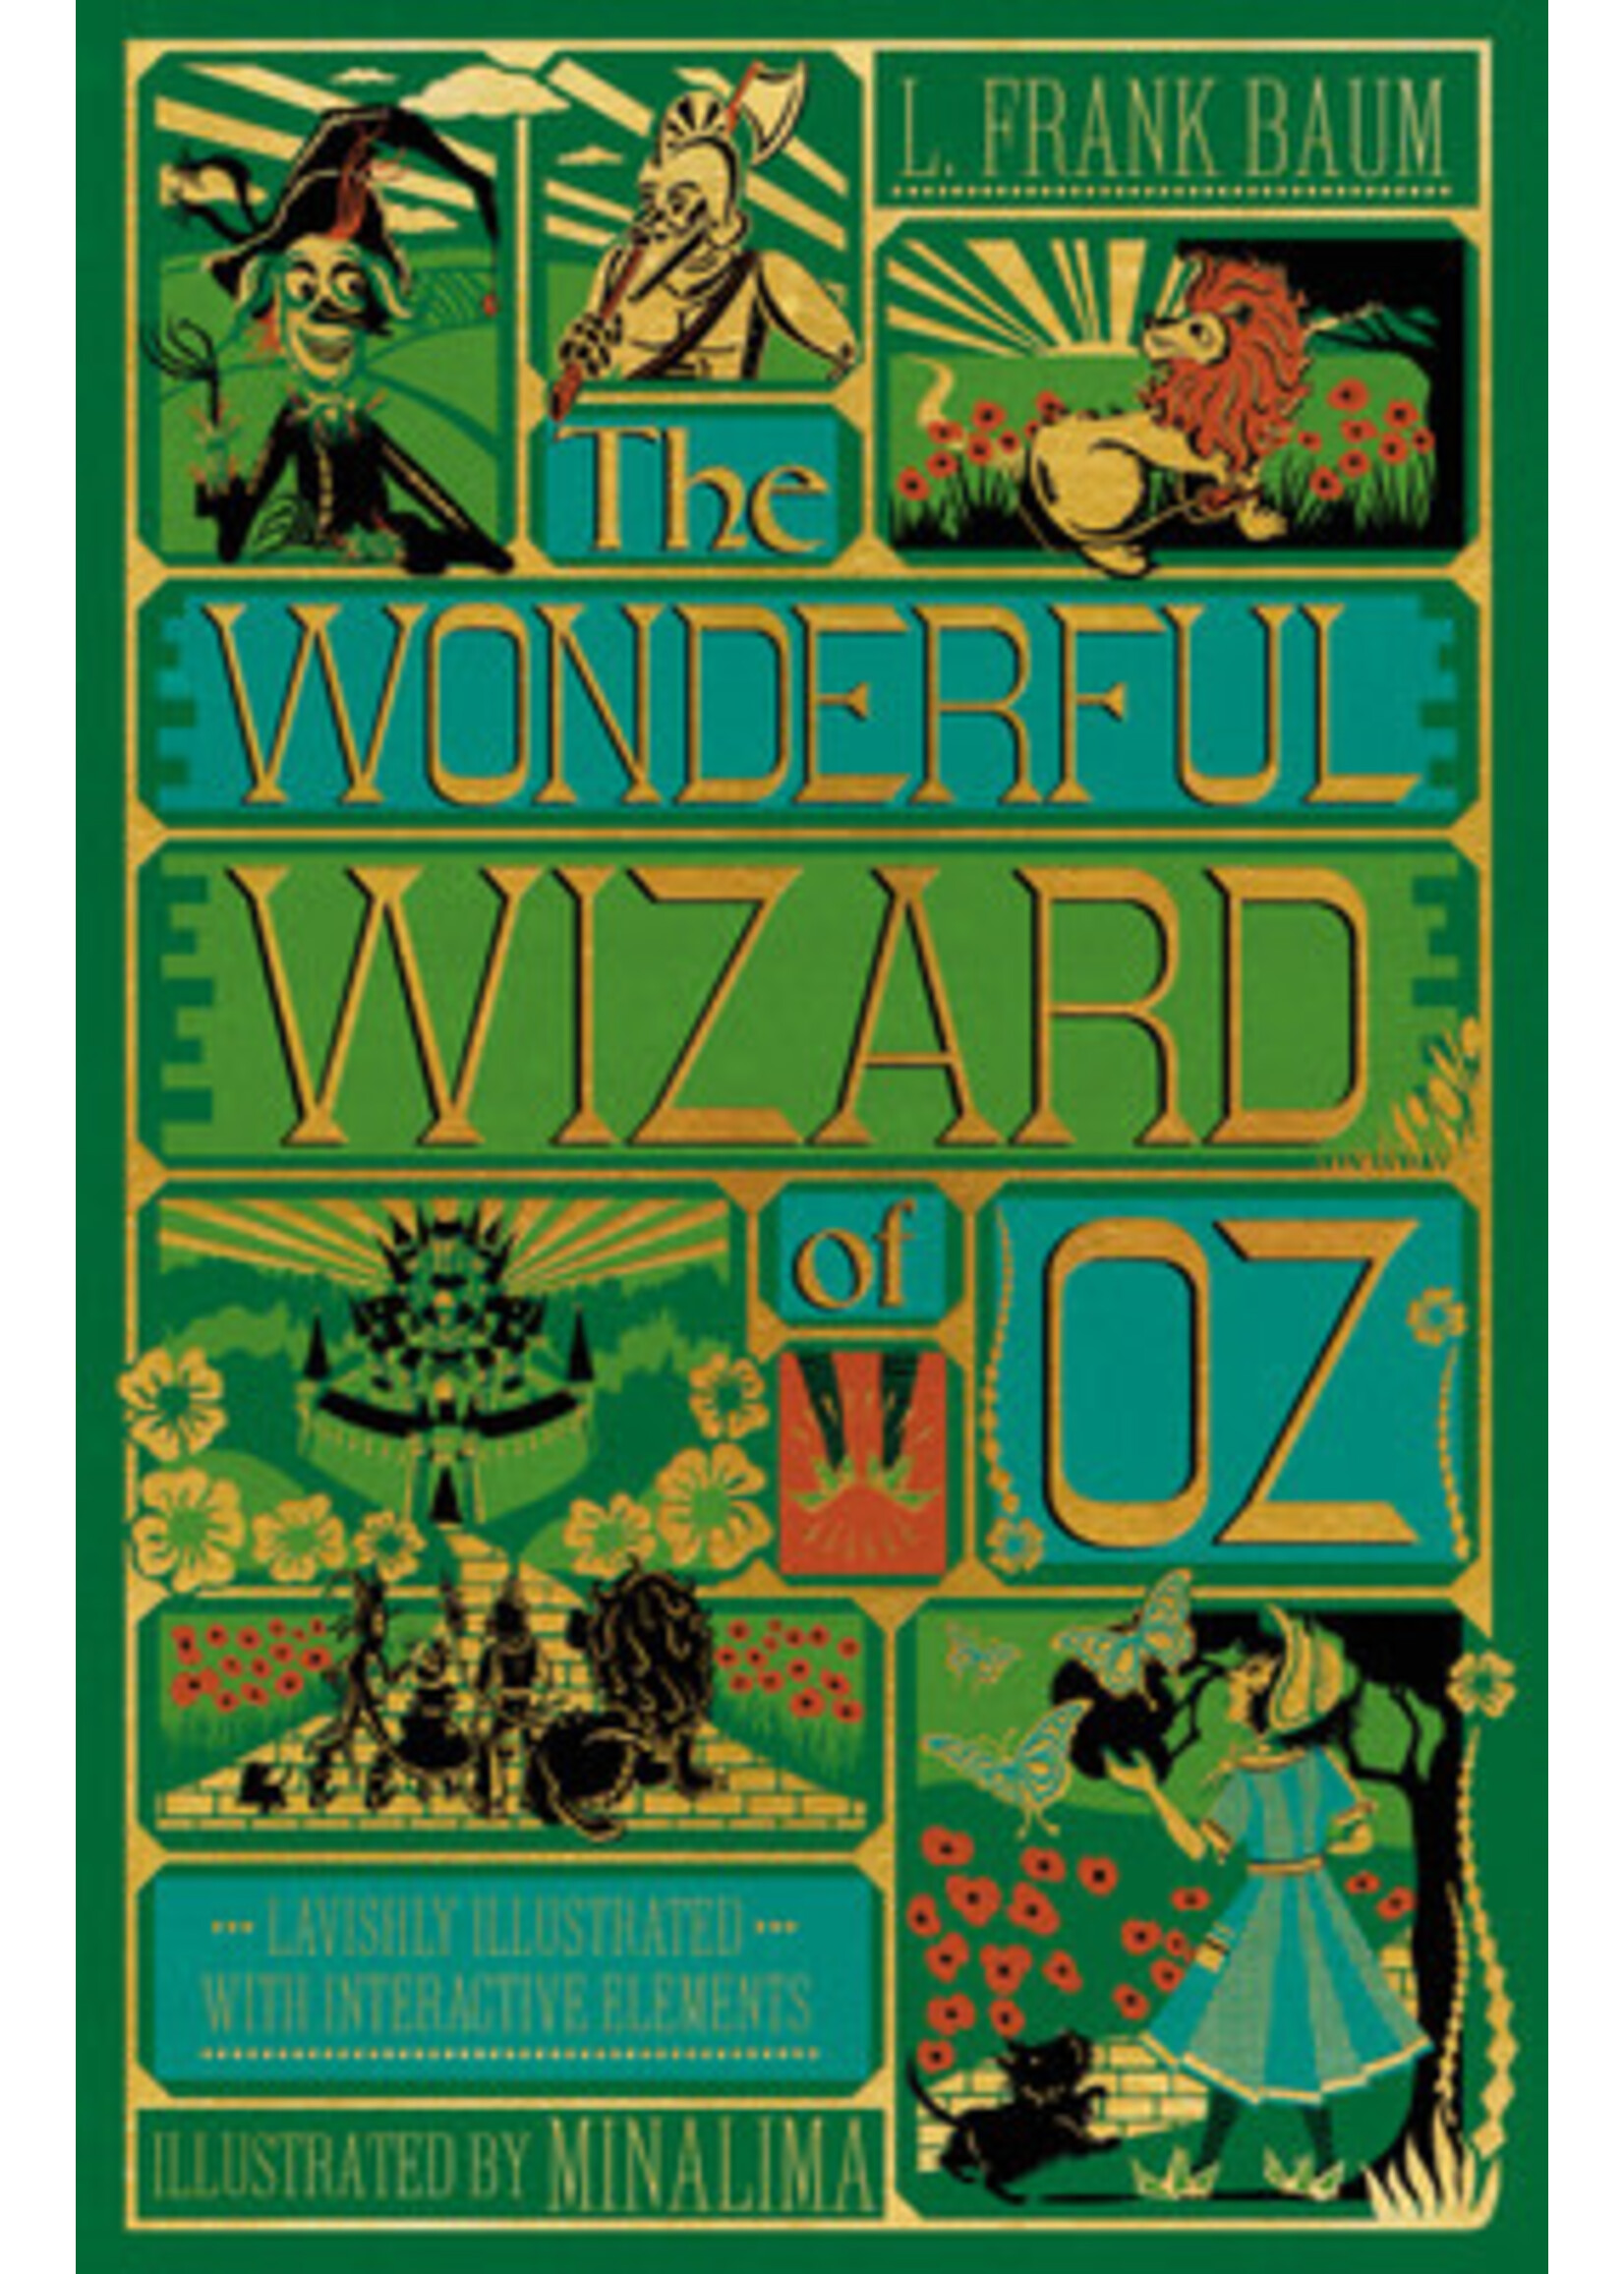 The Wonderful Wizard of Oz Interactive, [Illustrated with Interactive Elements] by L. Frank Baum,  MinaLima Design